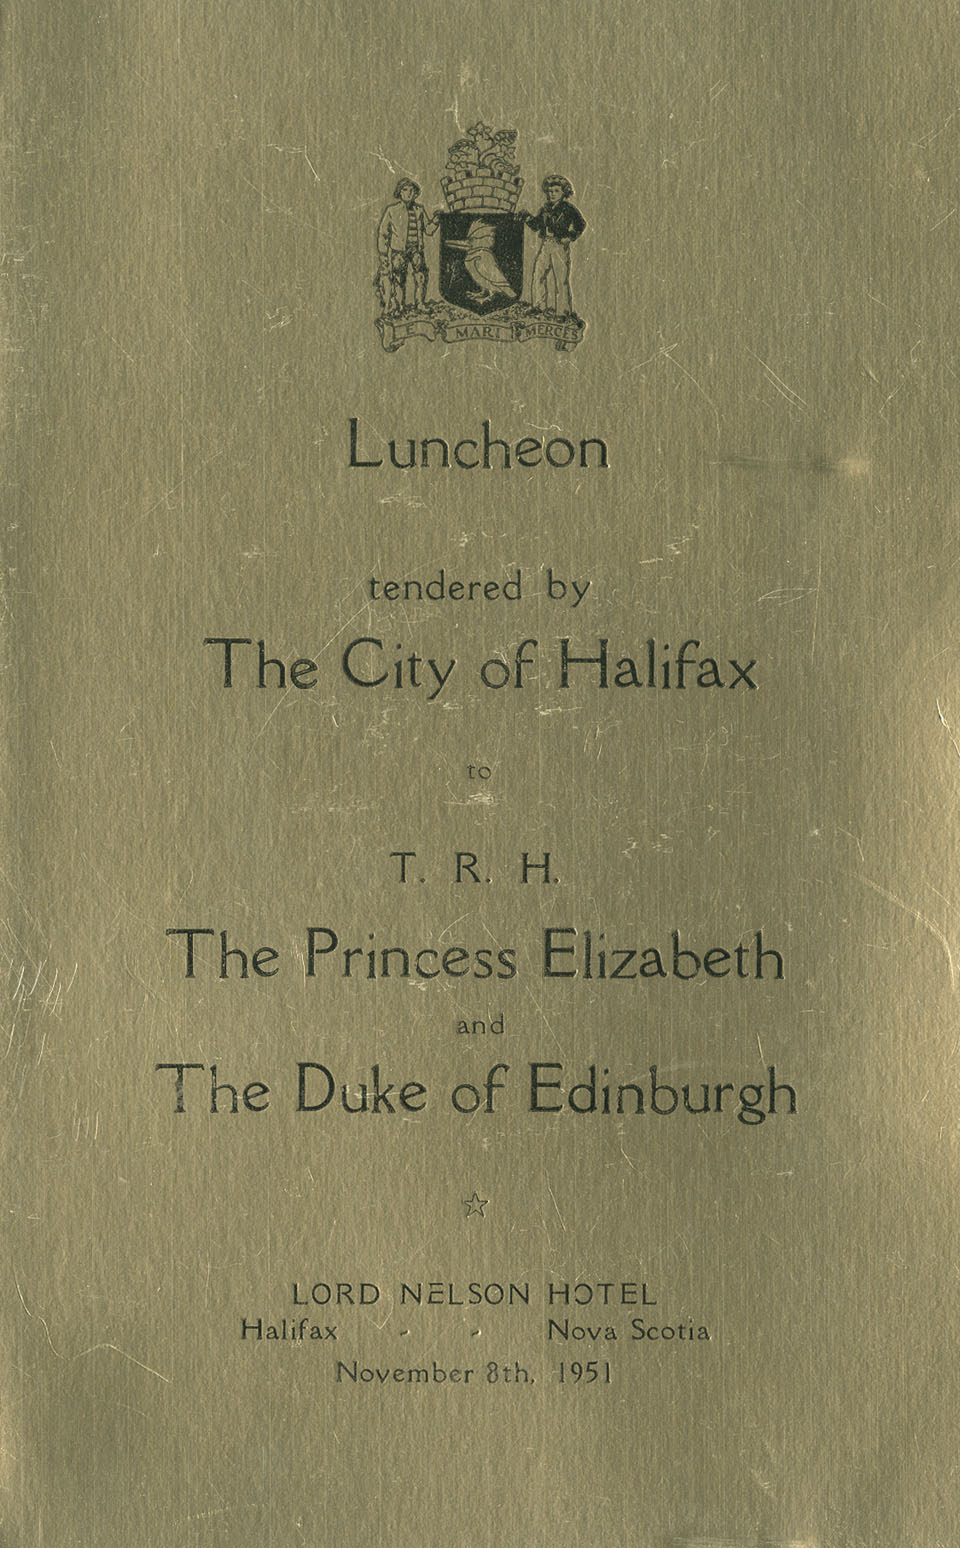 Programme for luncheon held at Lord Nelson Hotel